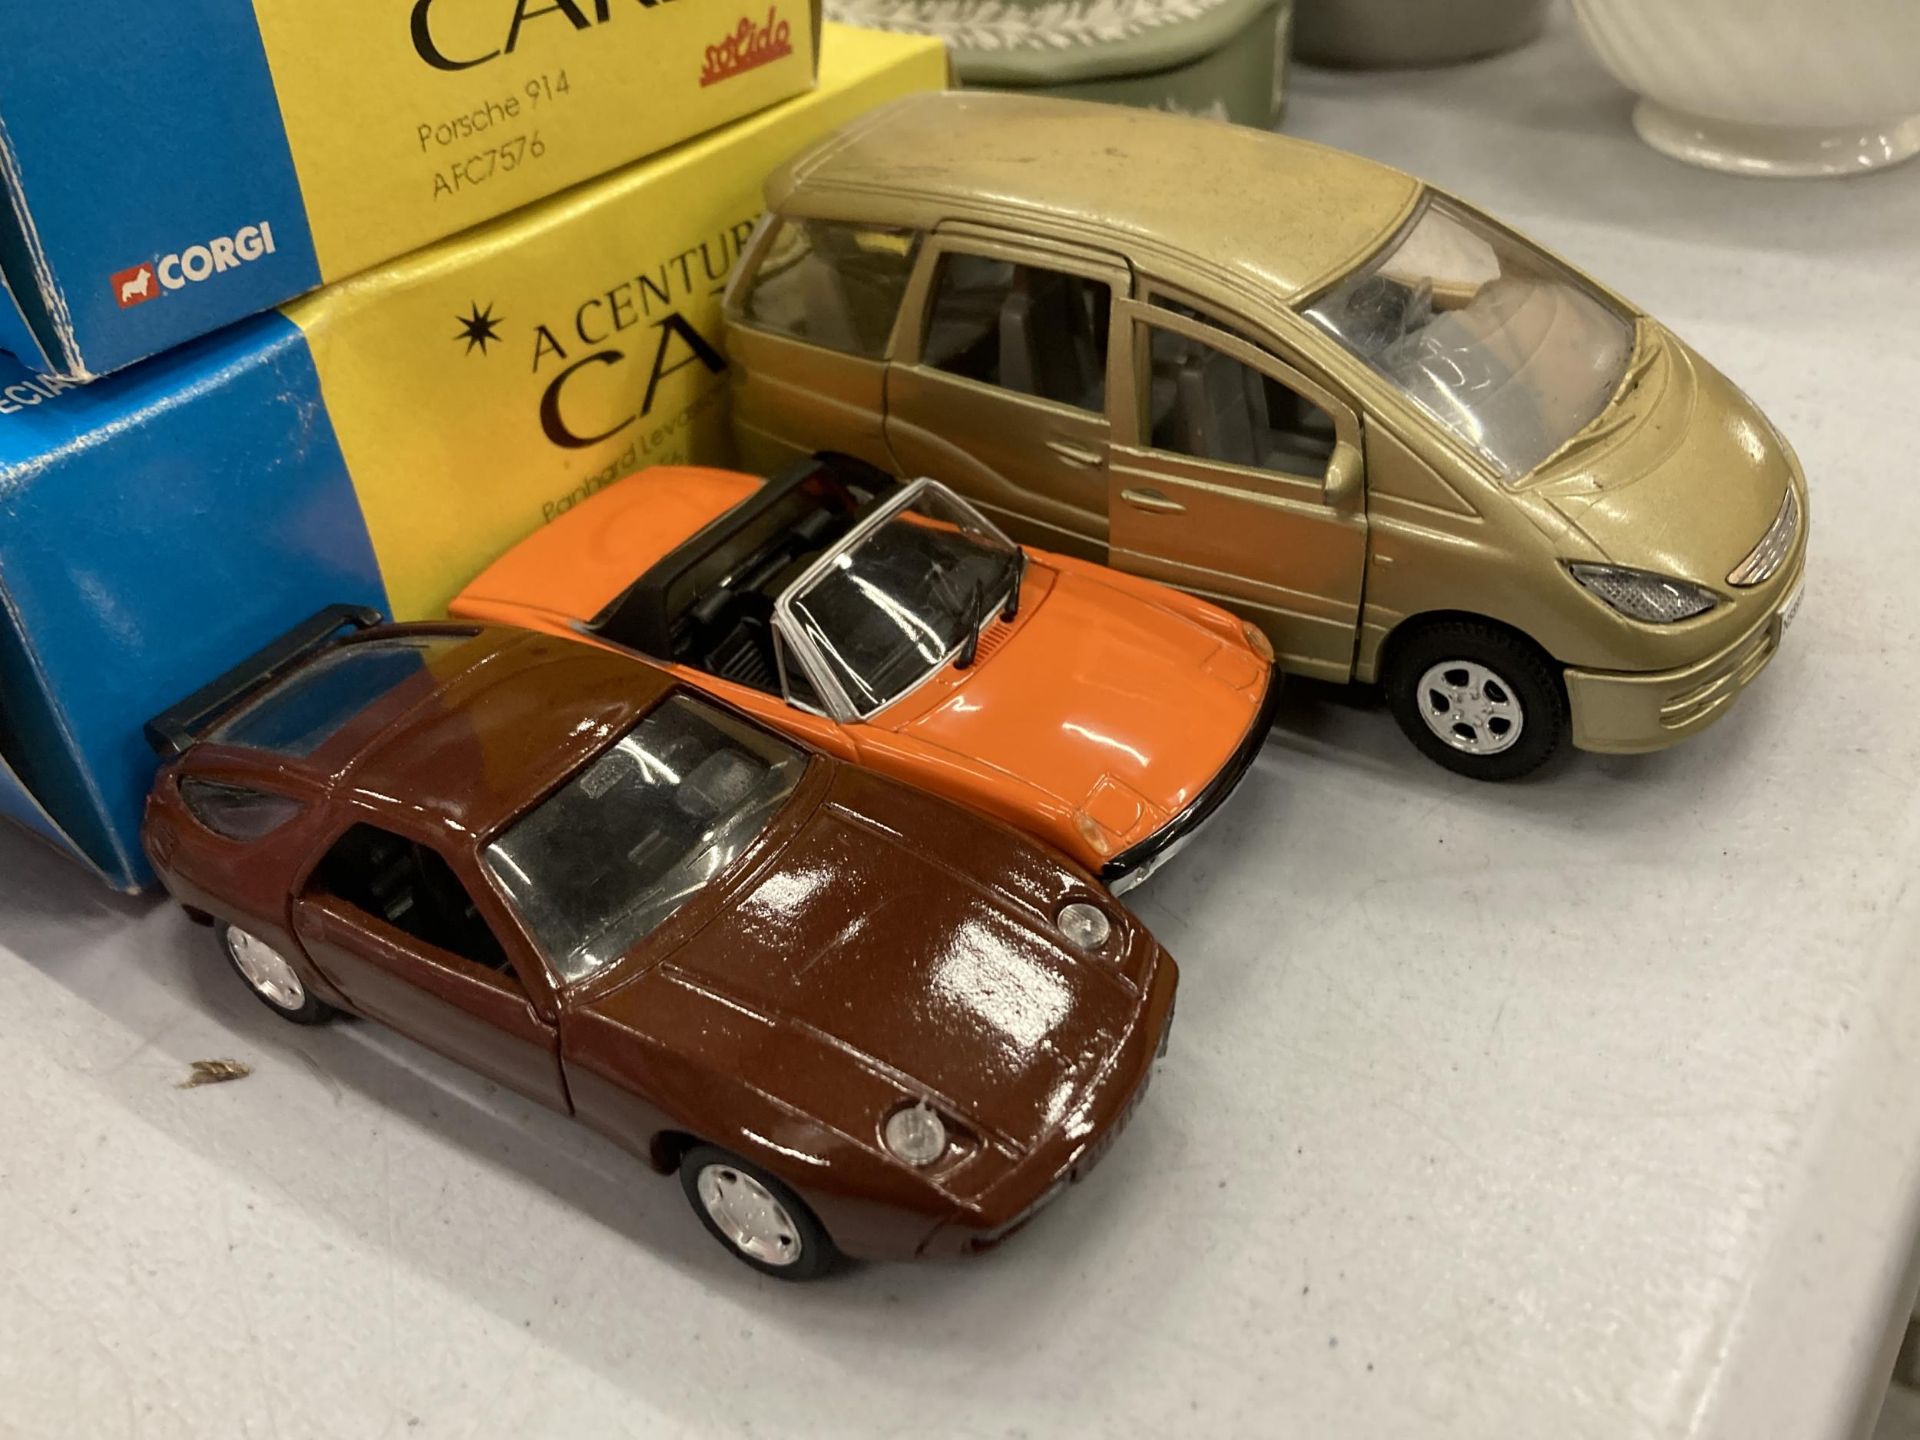 THREE BOXED CORGI 'A CENTURY OF CARS' TO INCLUDE A PORSCHE 928 GT, 914 AND A NISSAN PRAIRIE - Image 2 of 4